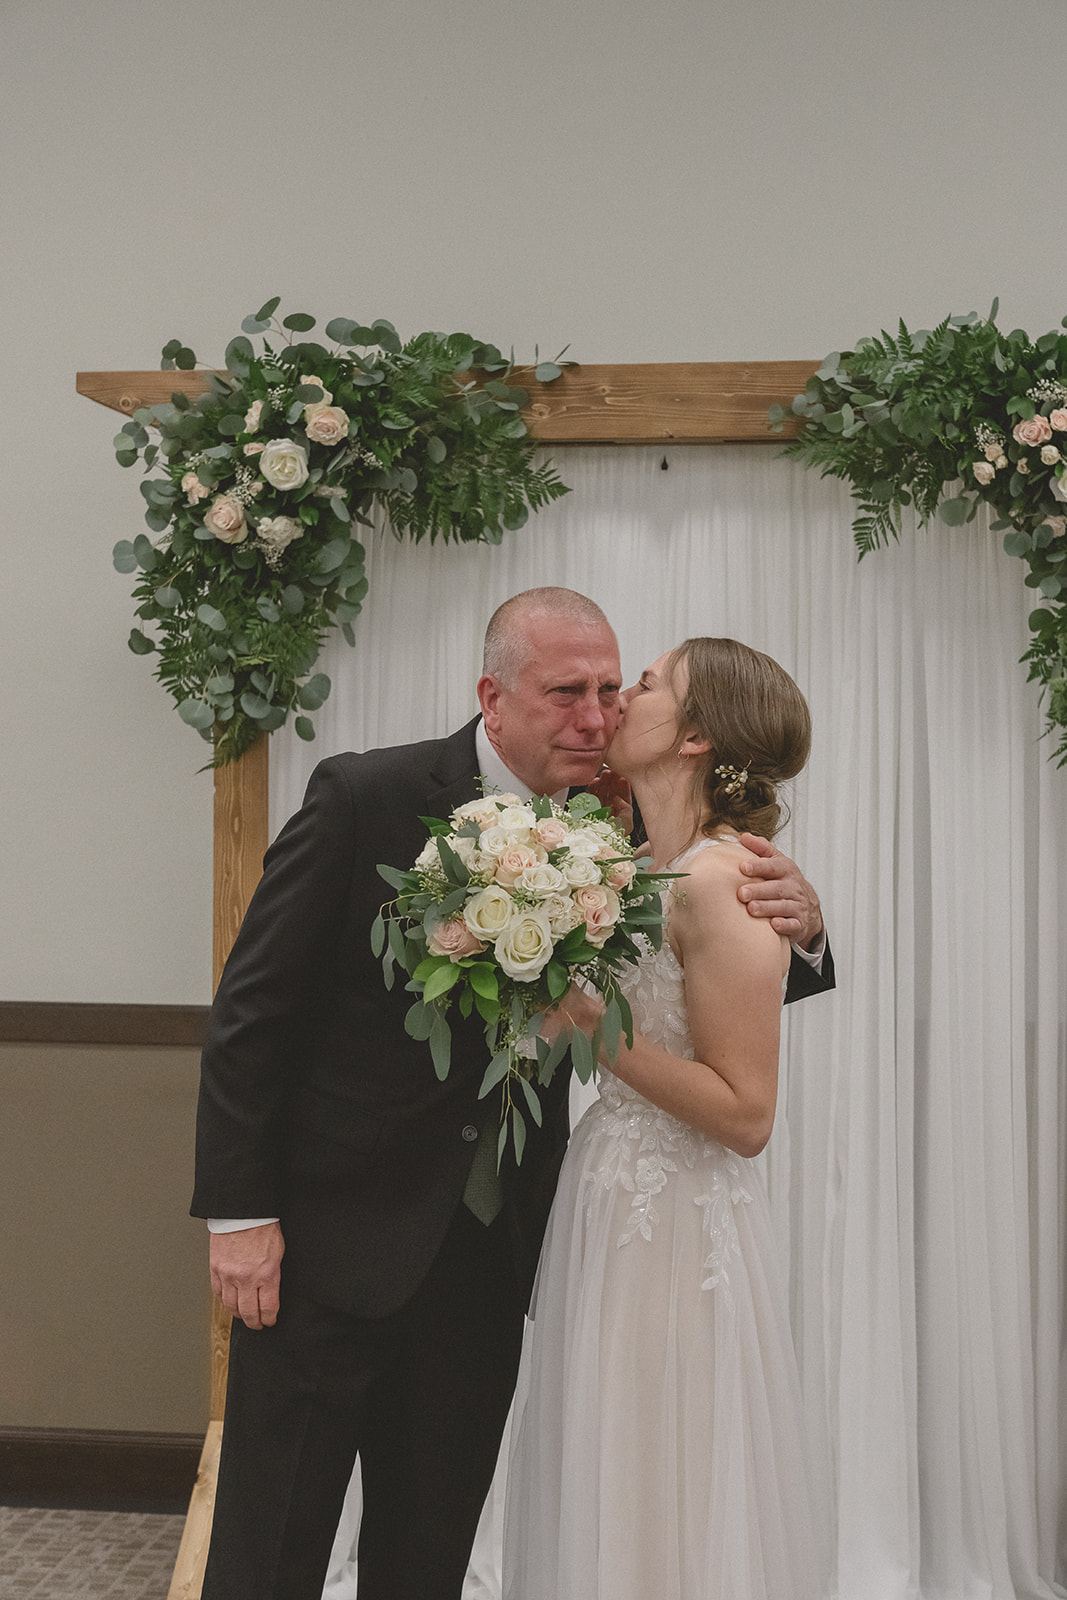 Bride giving a kiss on dad's cheek
